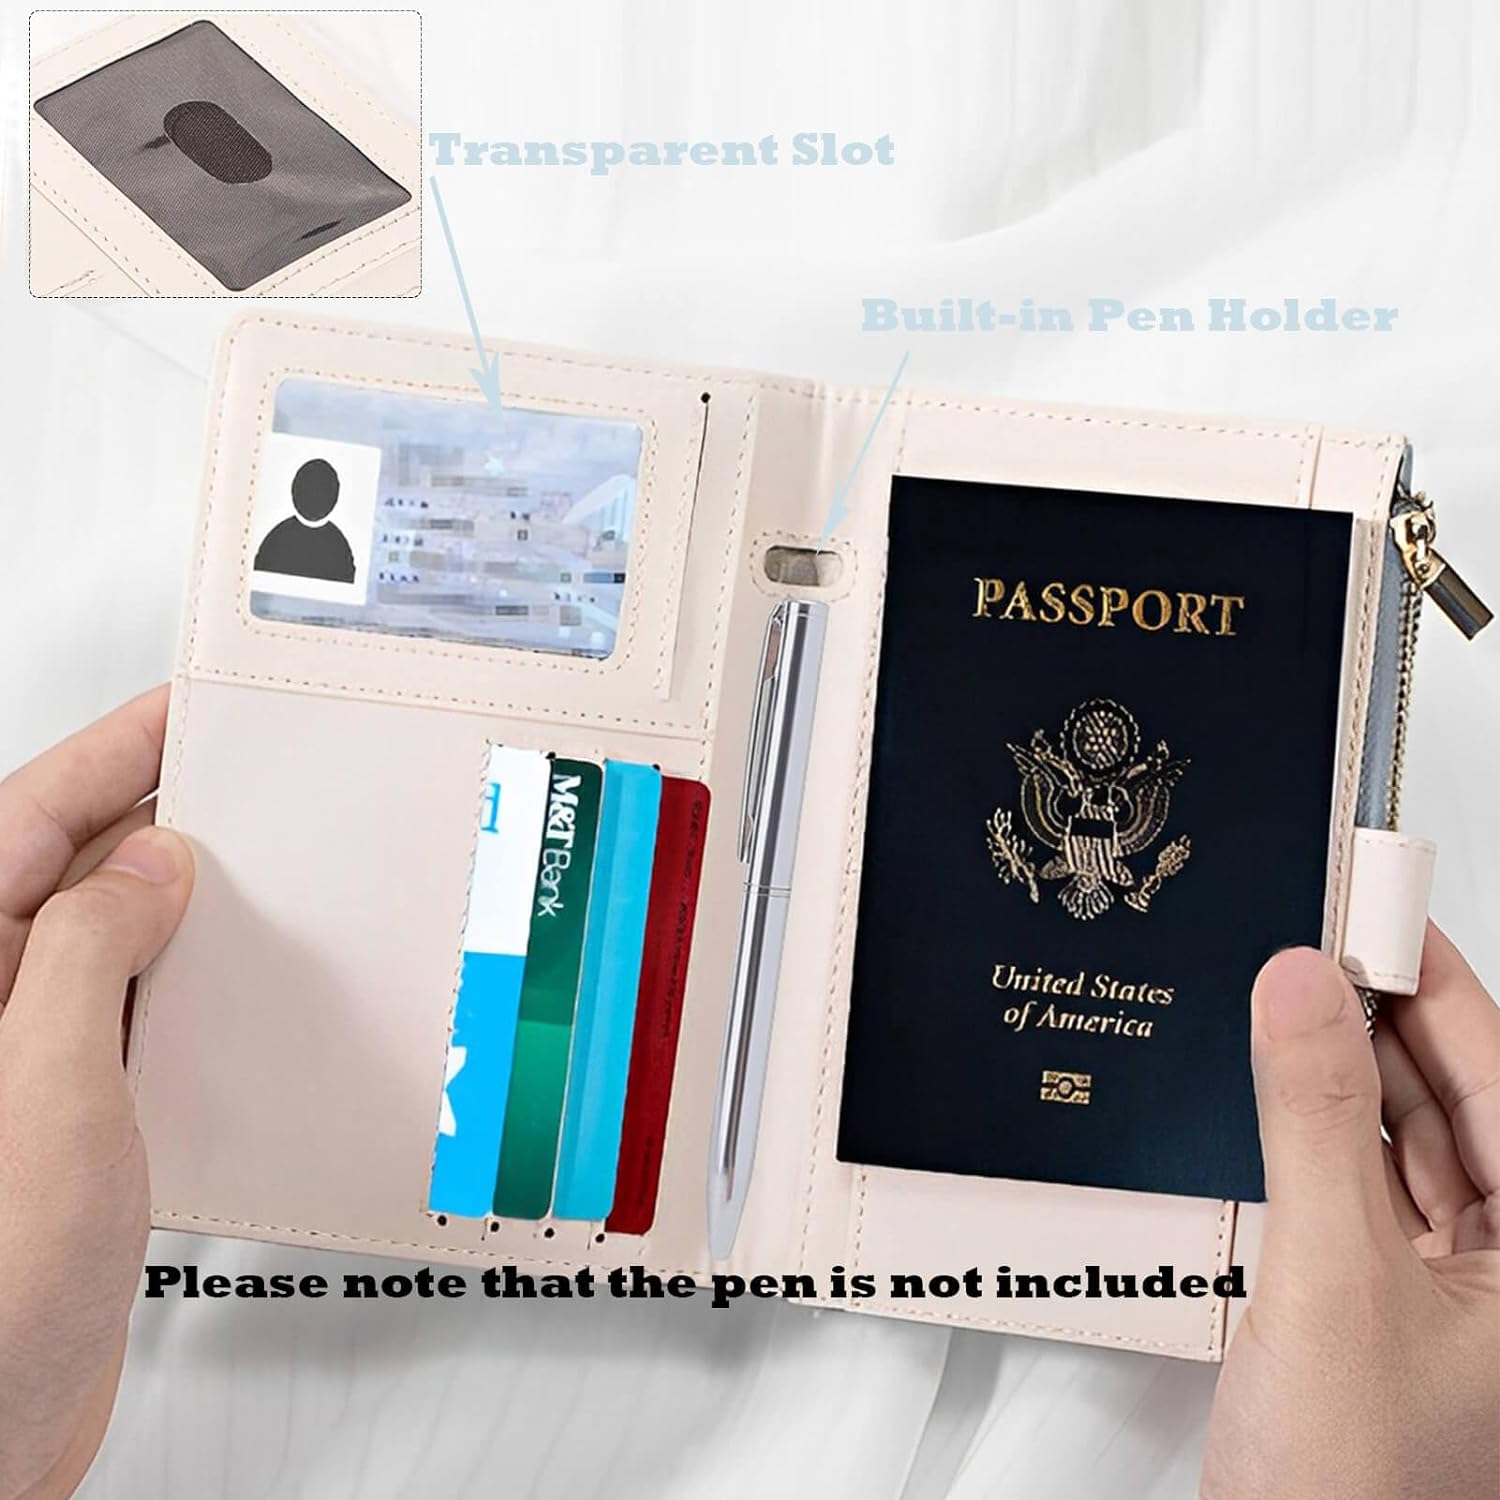 JoyChoi RFID Passport Holder with Airtag, PU Leather Passport Cover, Travel Wallet with Zipper Pocket, Pen Slot & SIM Card Ejector Tool, Essential Travel Accessories, Blue., Blue, Traveling